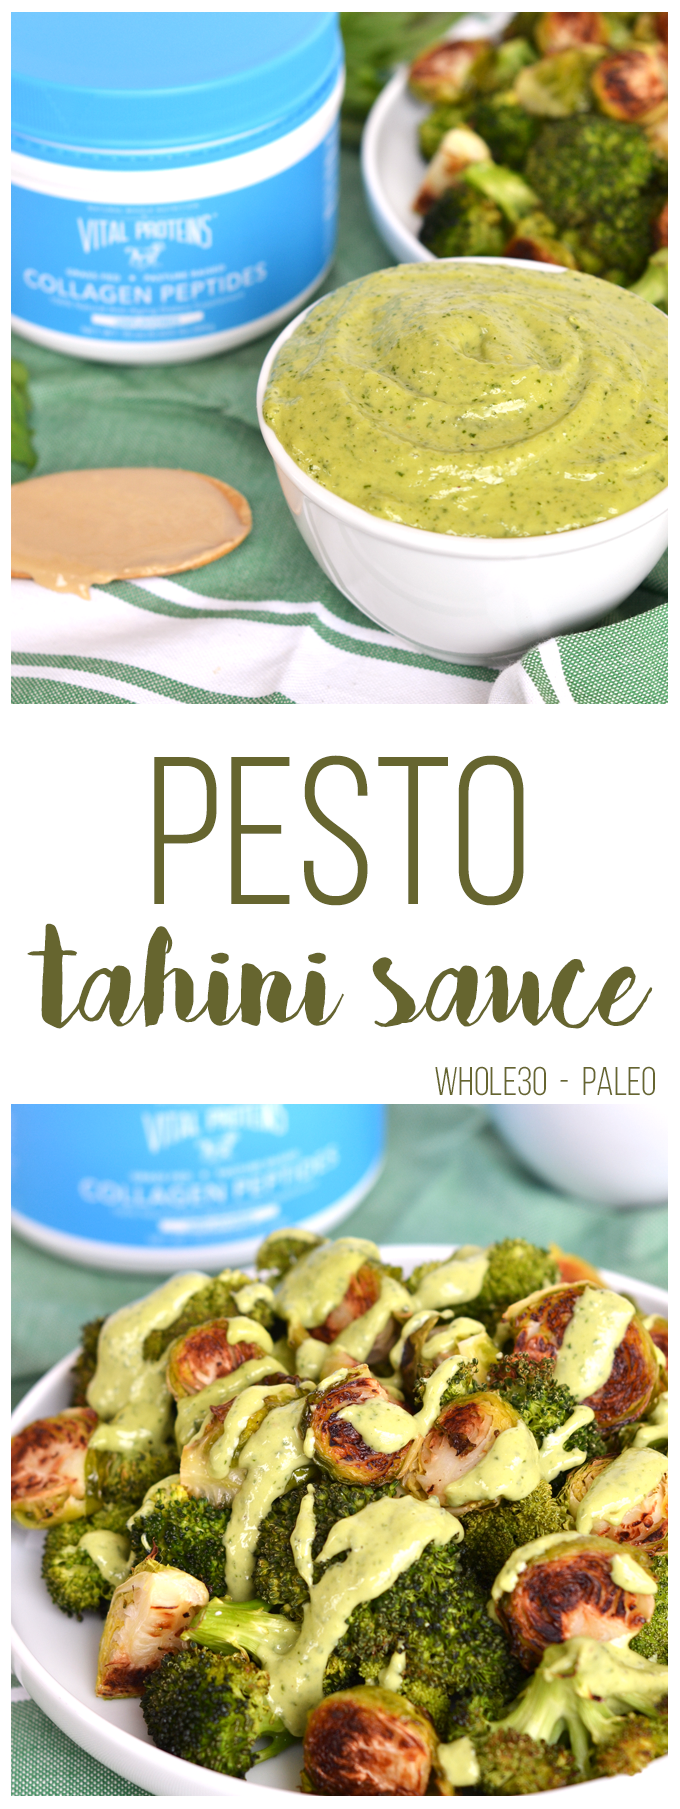 This Pesto Tahini Sauce is Whole30 & Paleo - perfect to top on veggies, meat or use as a dip. It is also packed with Collagen for an extra protein boost!